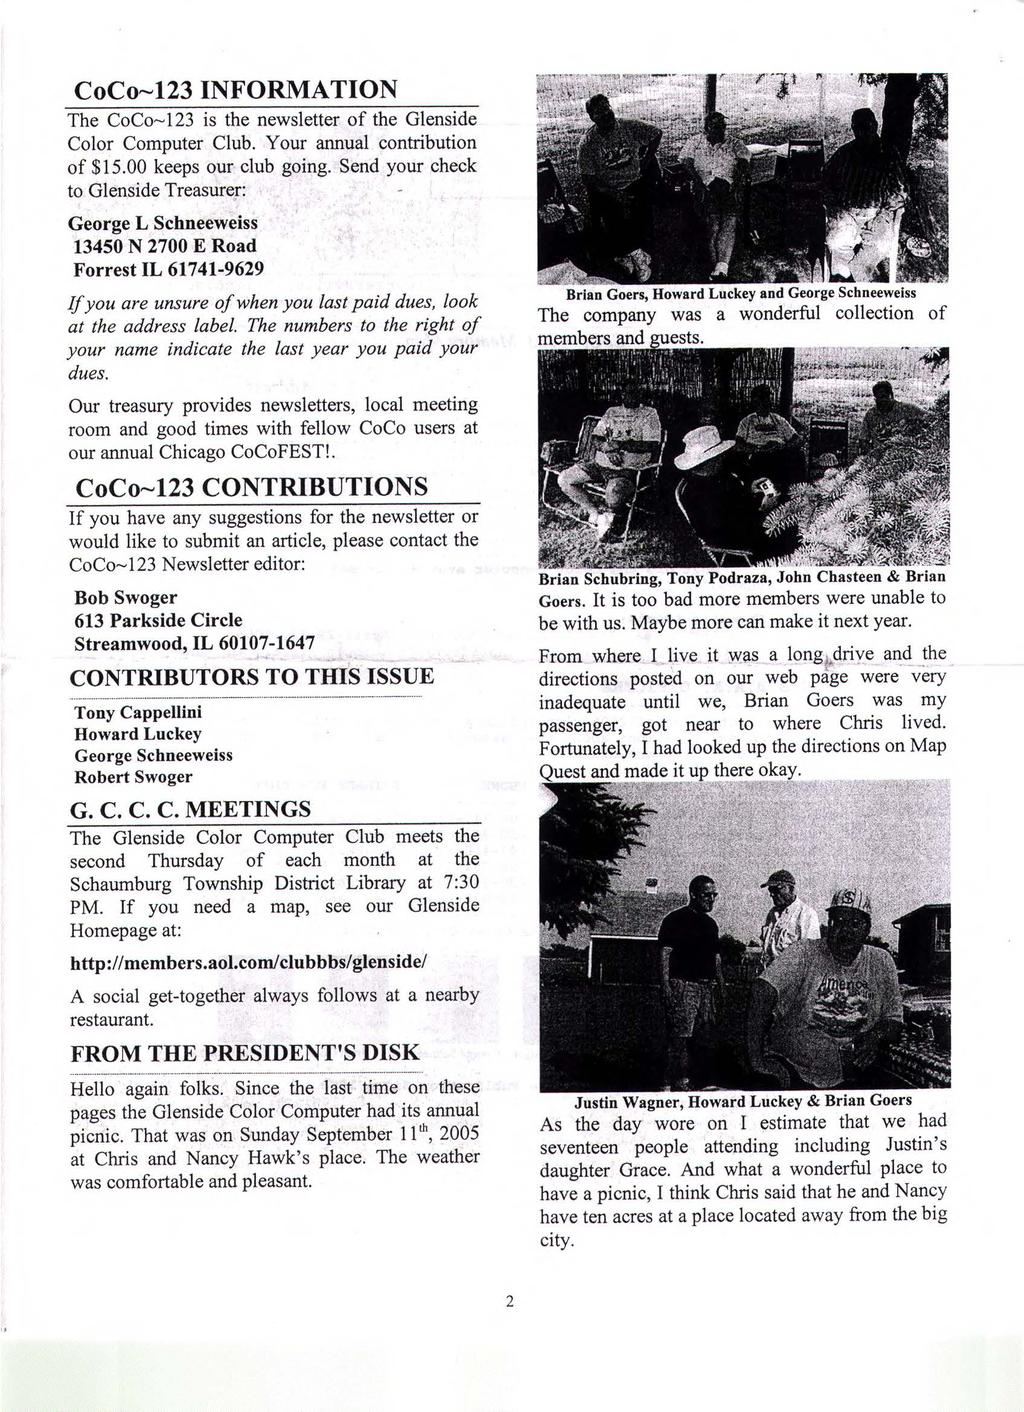 CoCo, 123 INFORMATION The CoCo--123 is the newsletter of the Glenside Color Computer Club. Your annual contribution of $15.00 keeps our club going.